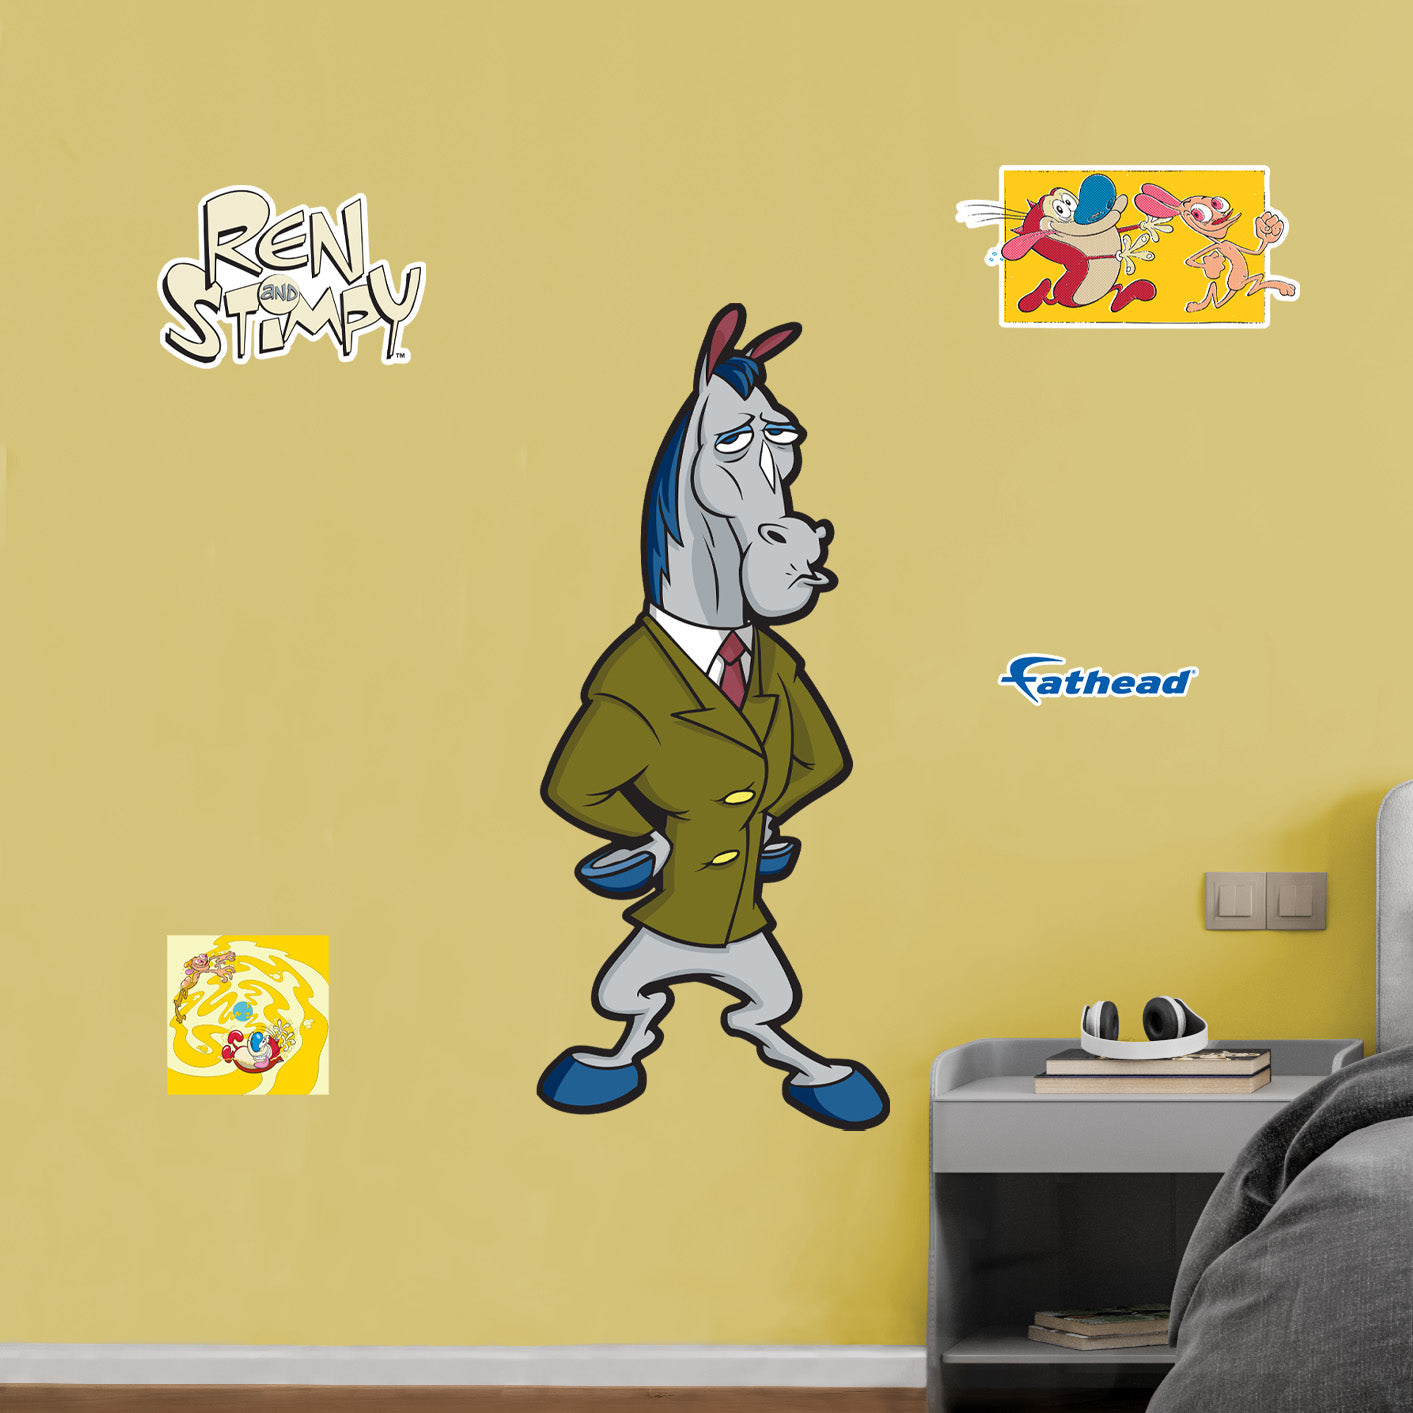 Ren and Stimpy: Mr. Horse RealBig - Officially Licensed Nickelodeon Removable Adhesive Decal